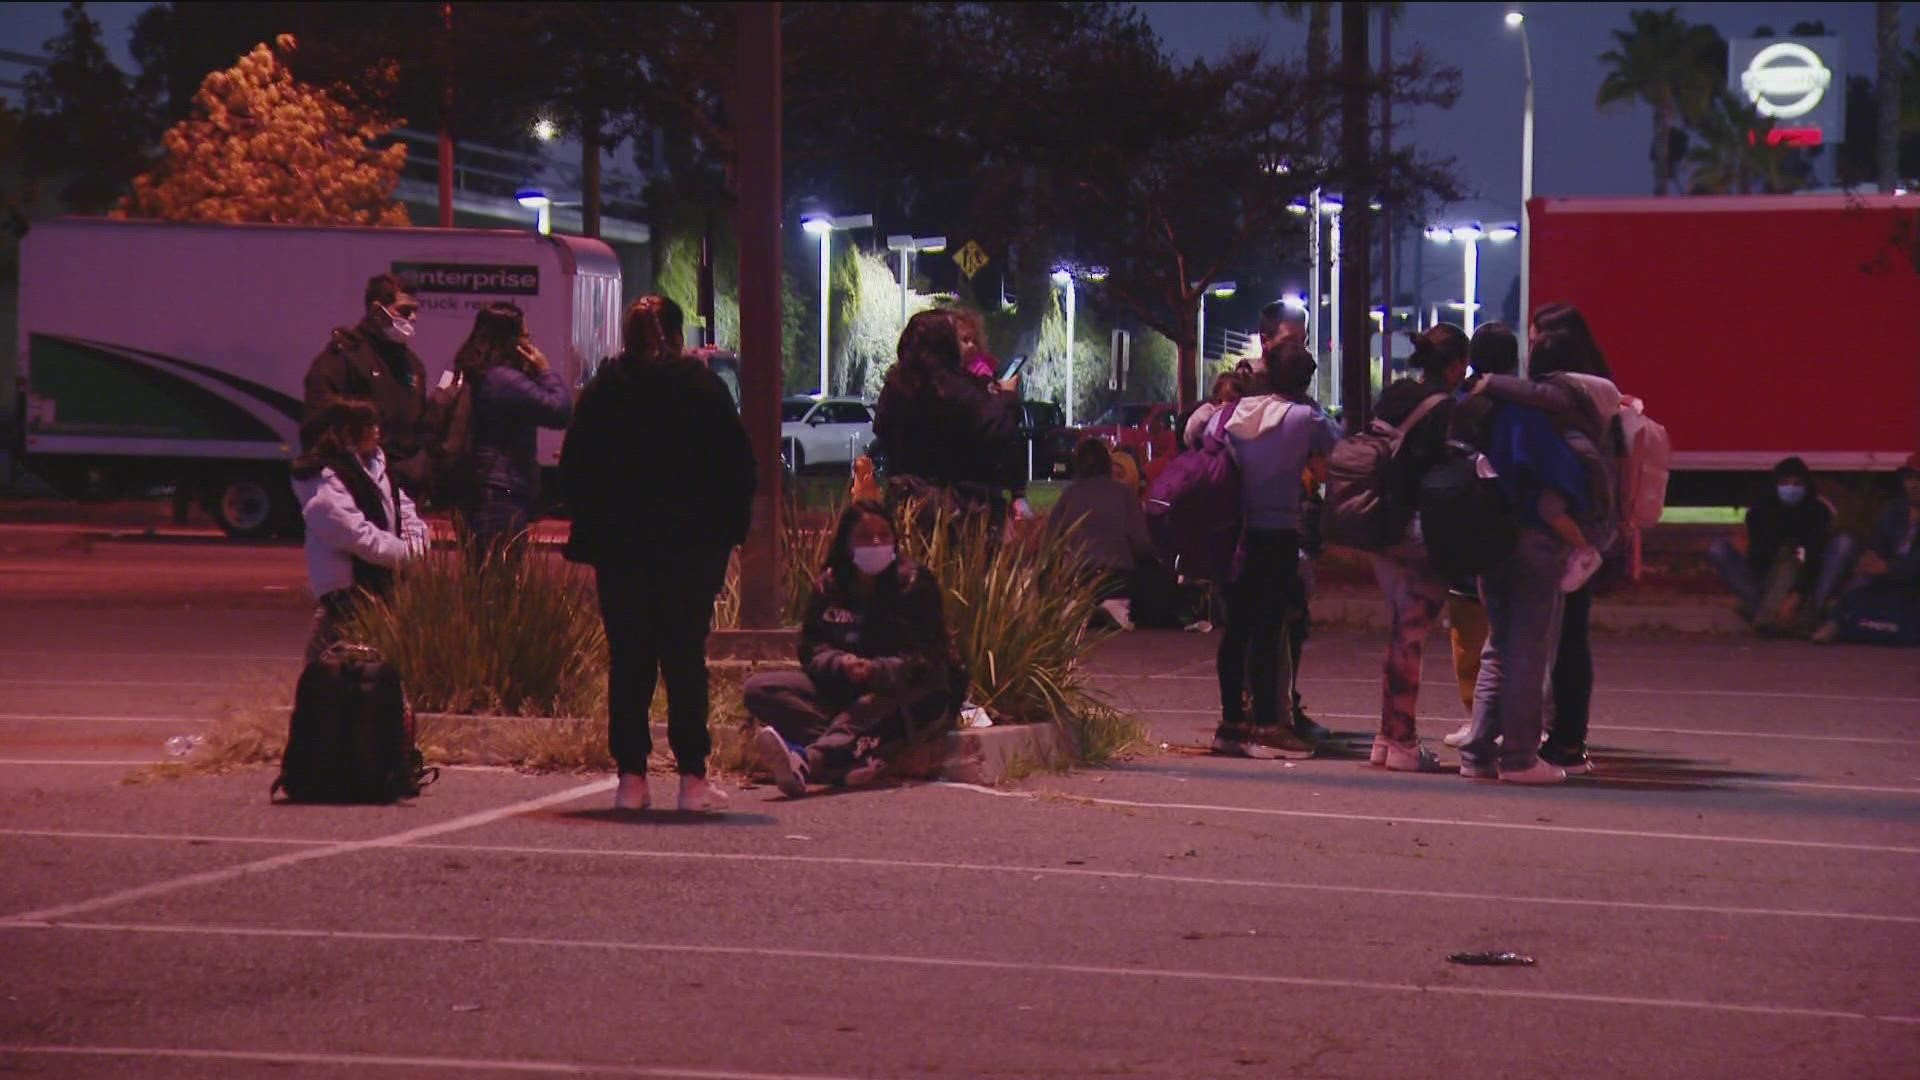 CBS 8 went to the transit center in El Cajon at 5:30 p.m. on Friday and saw dozens of people standing outside in an empty parking lot.